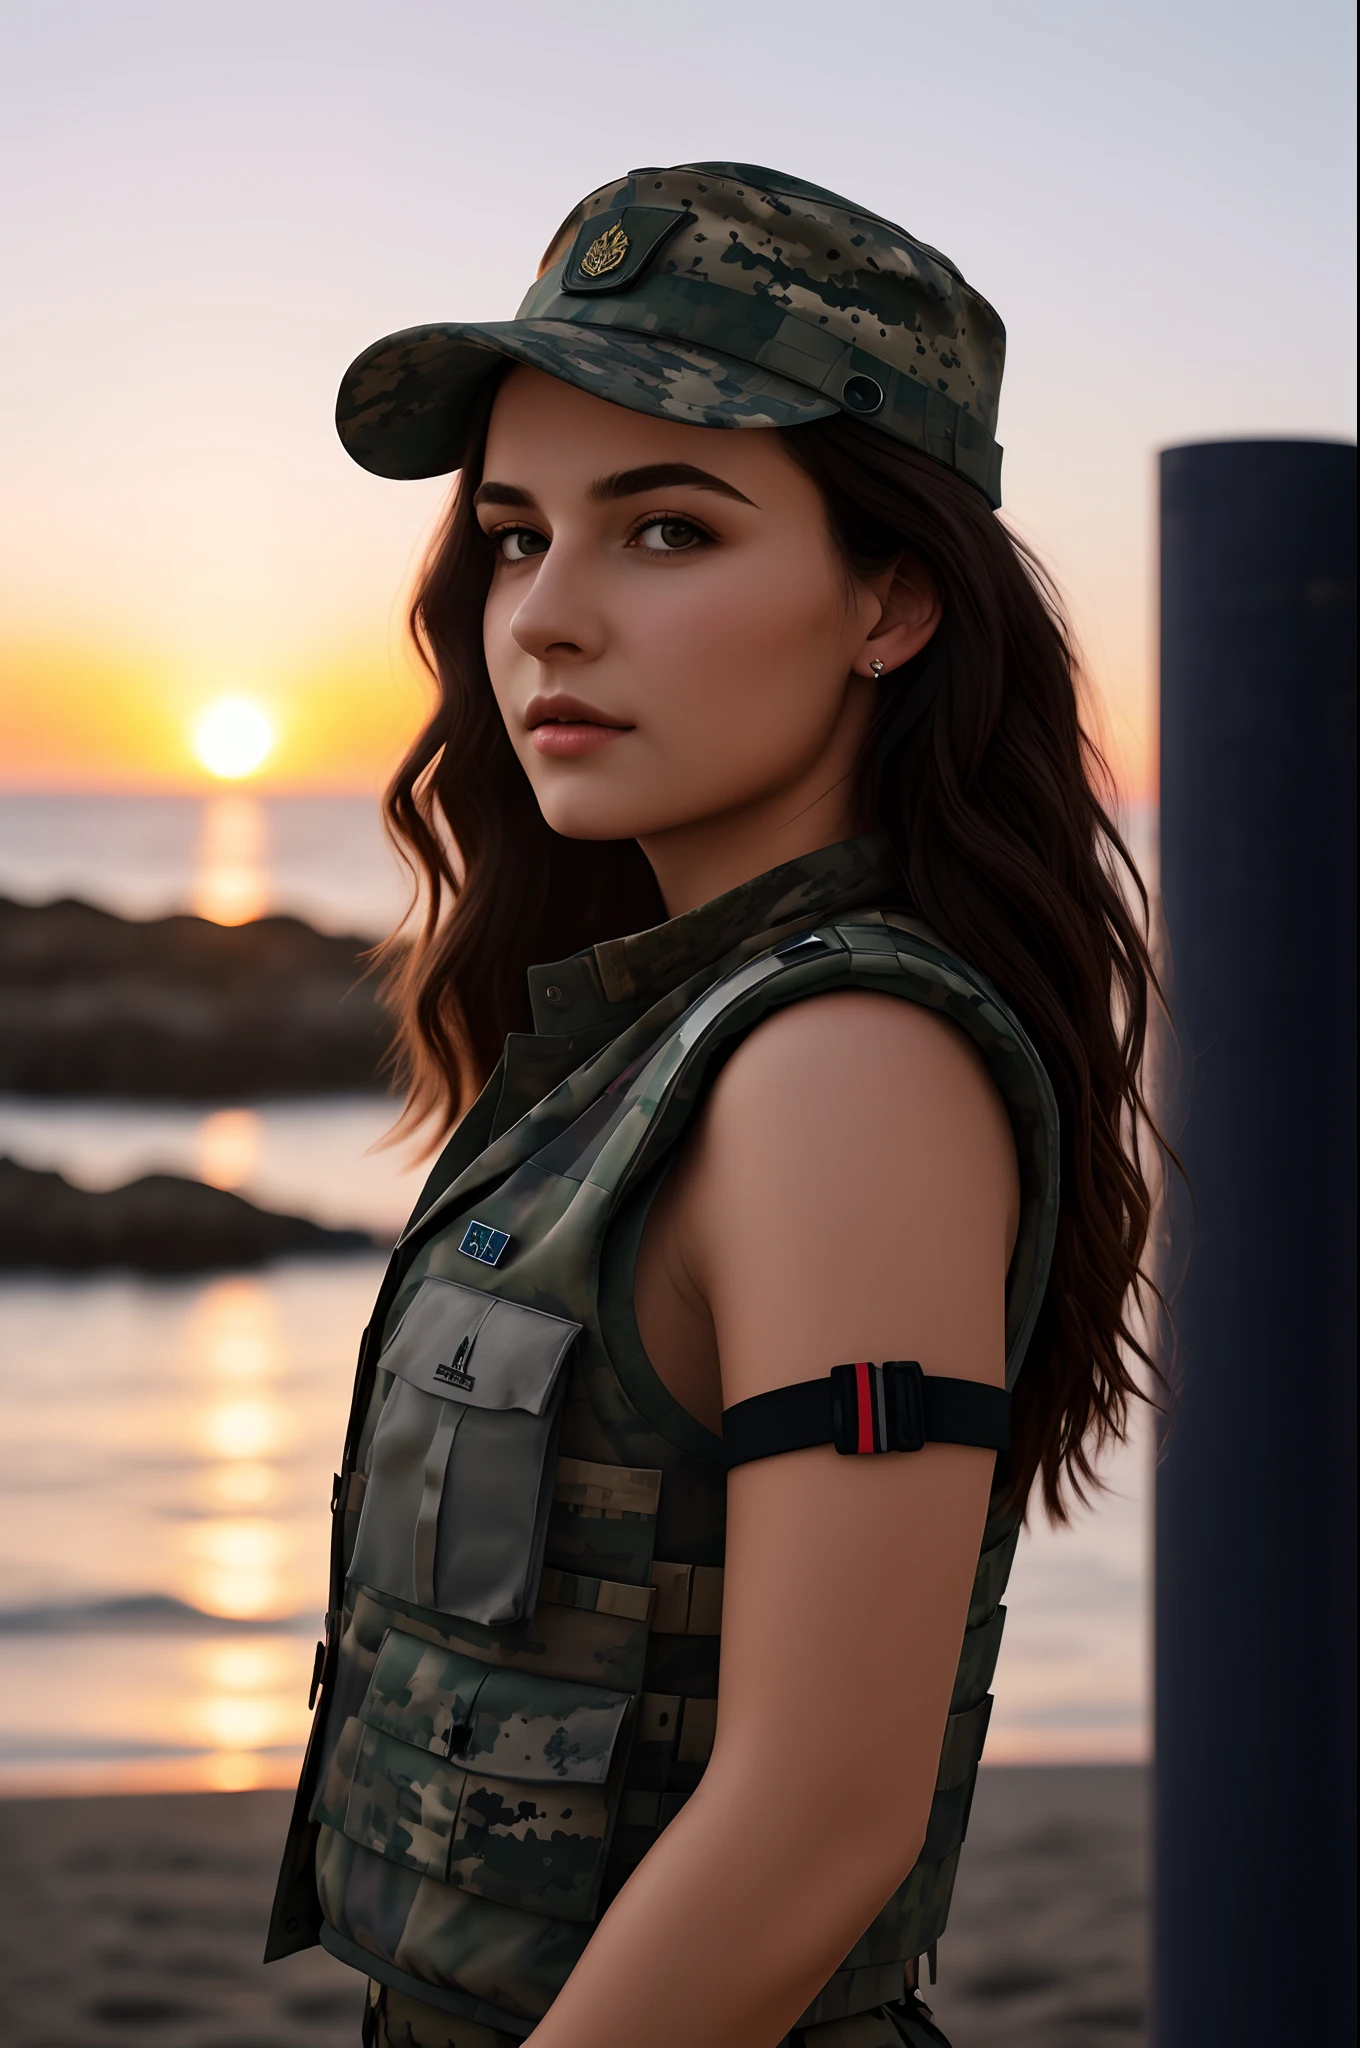 Cute girl with long hair in military uniform with modern armour vest with red armband on her right arm on sunset background with sea, photorealistic, 8k